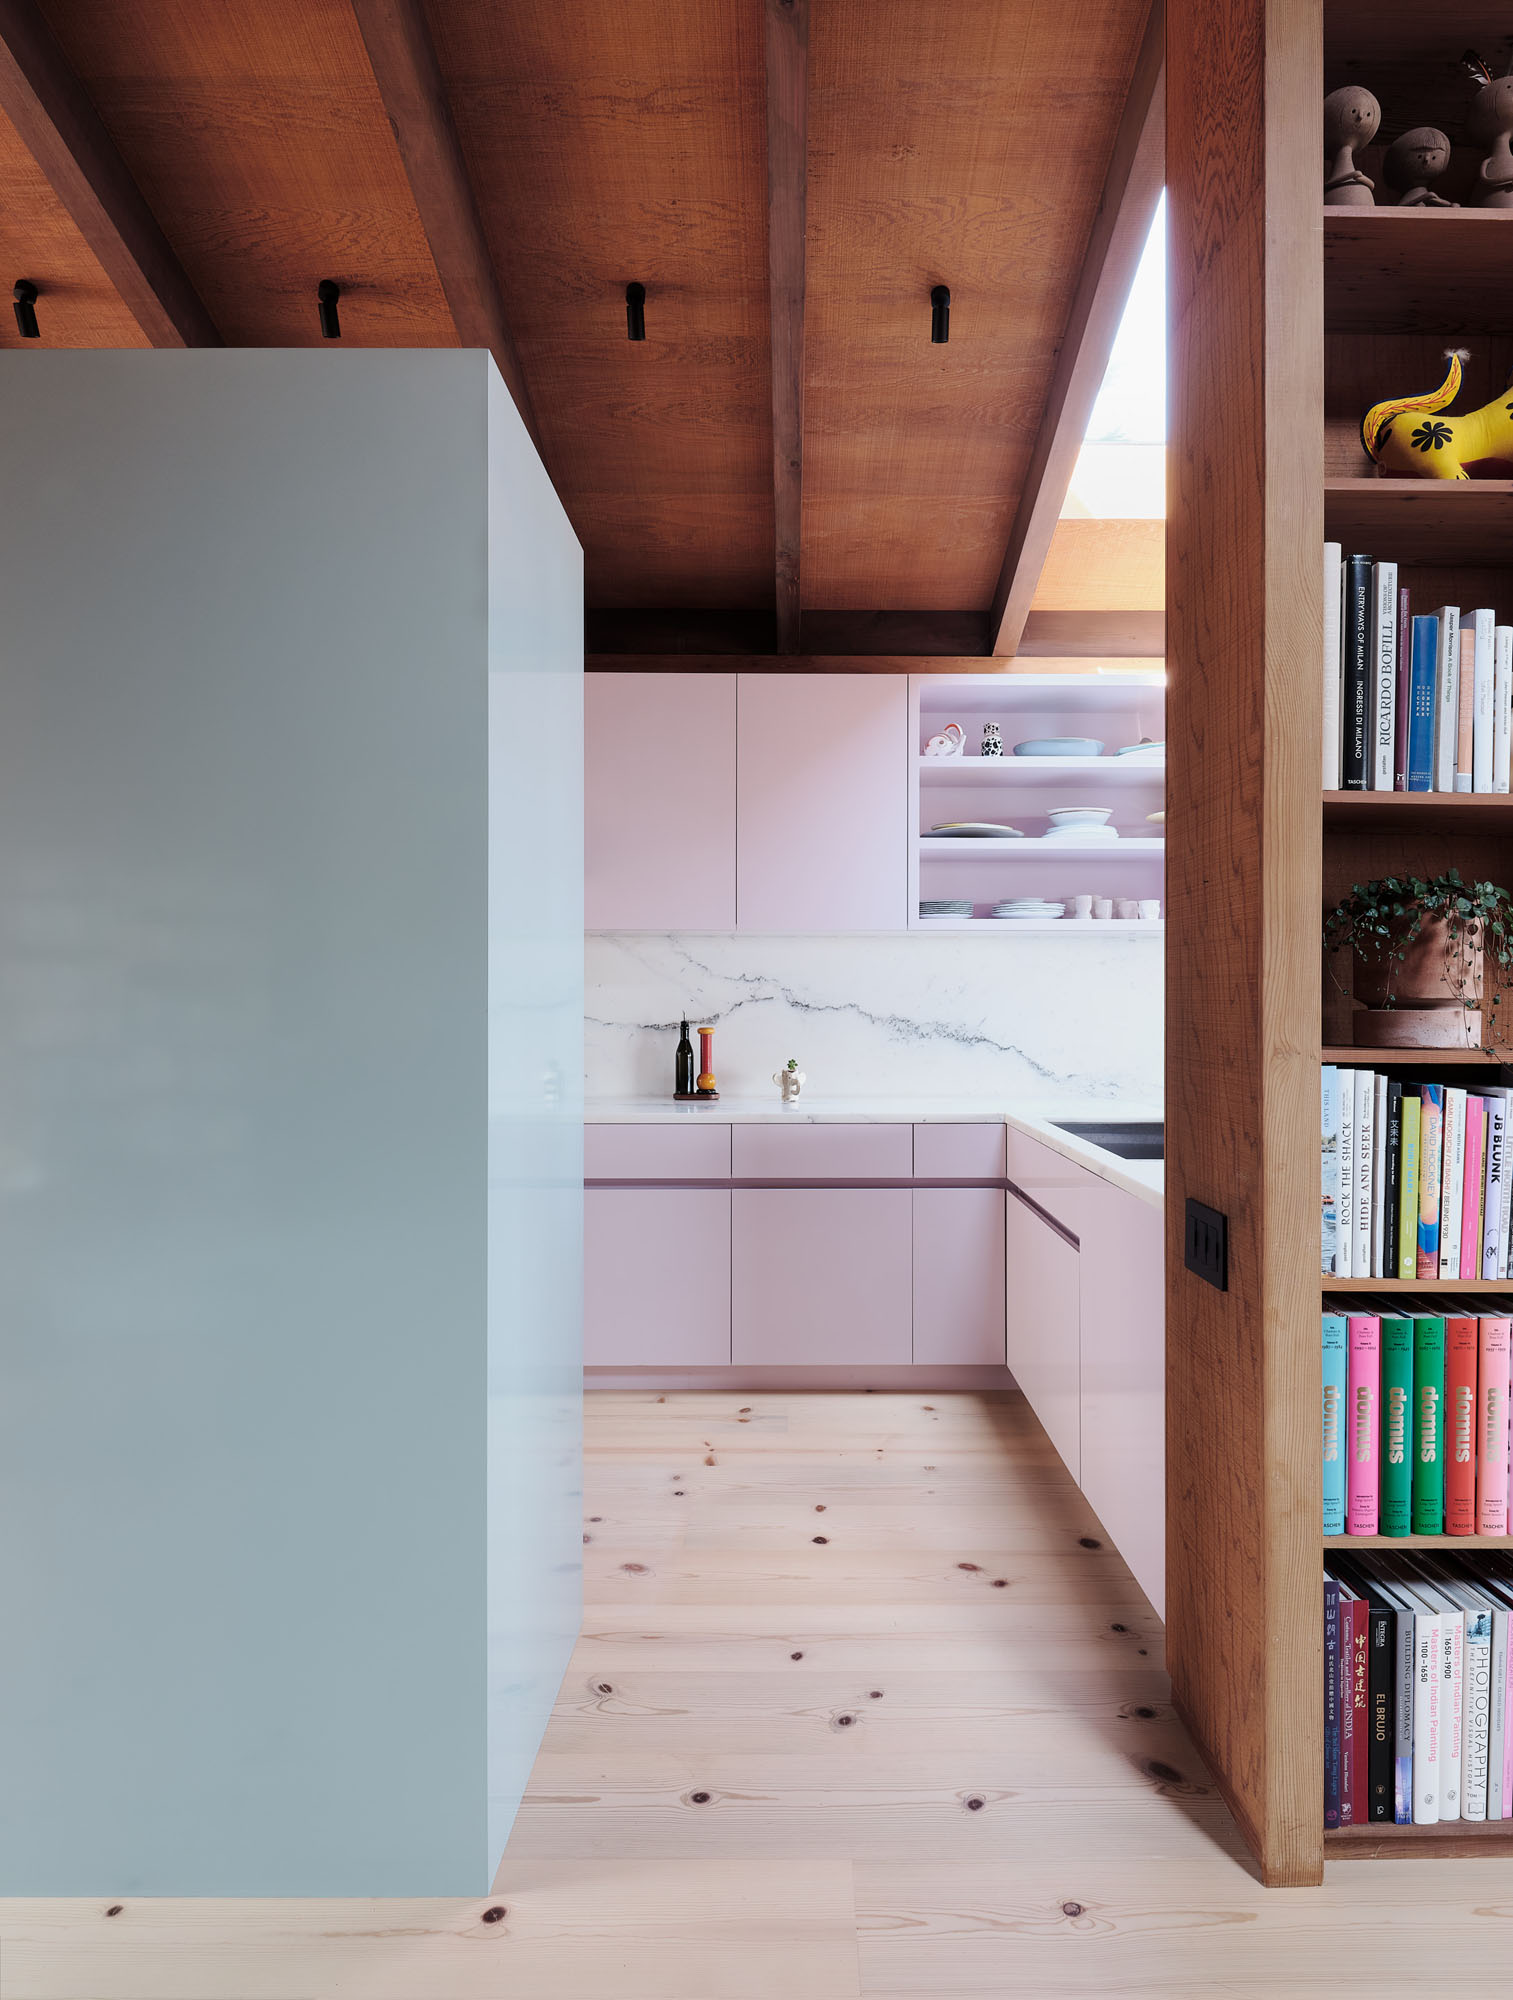 image of a kitchen with pastel cabinetry, light wood floors, and dark wood ceilings